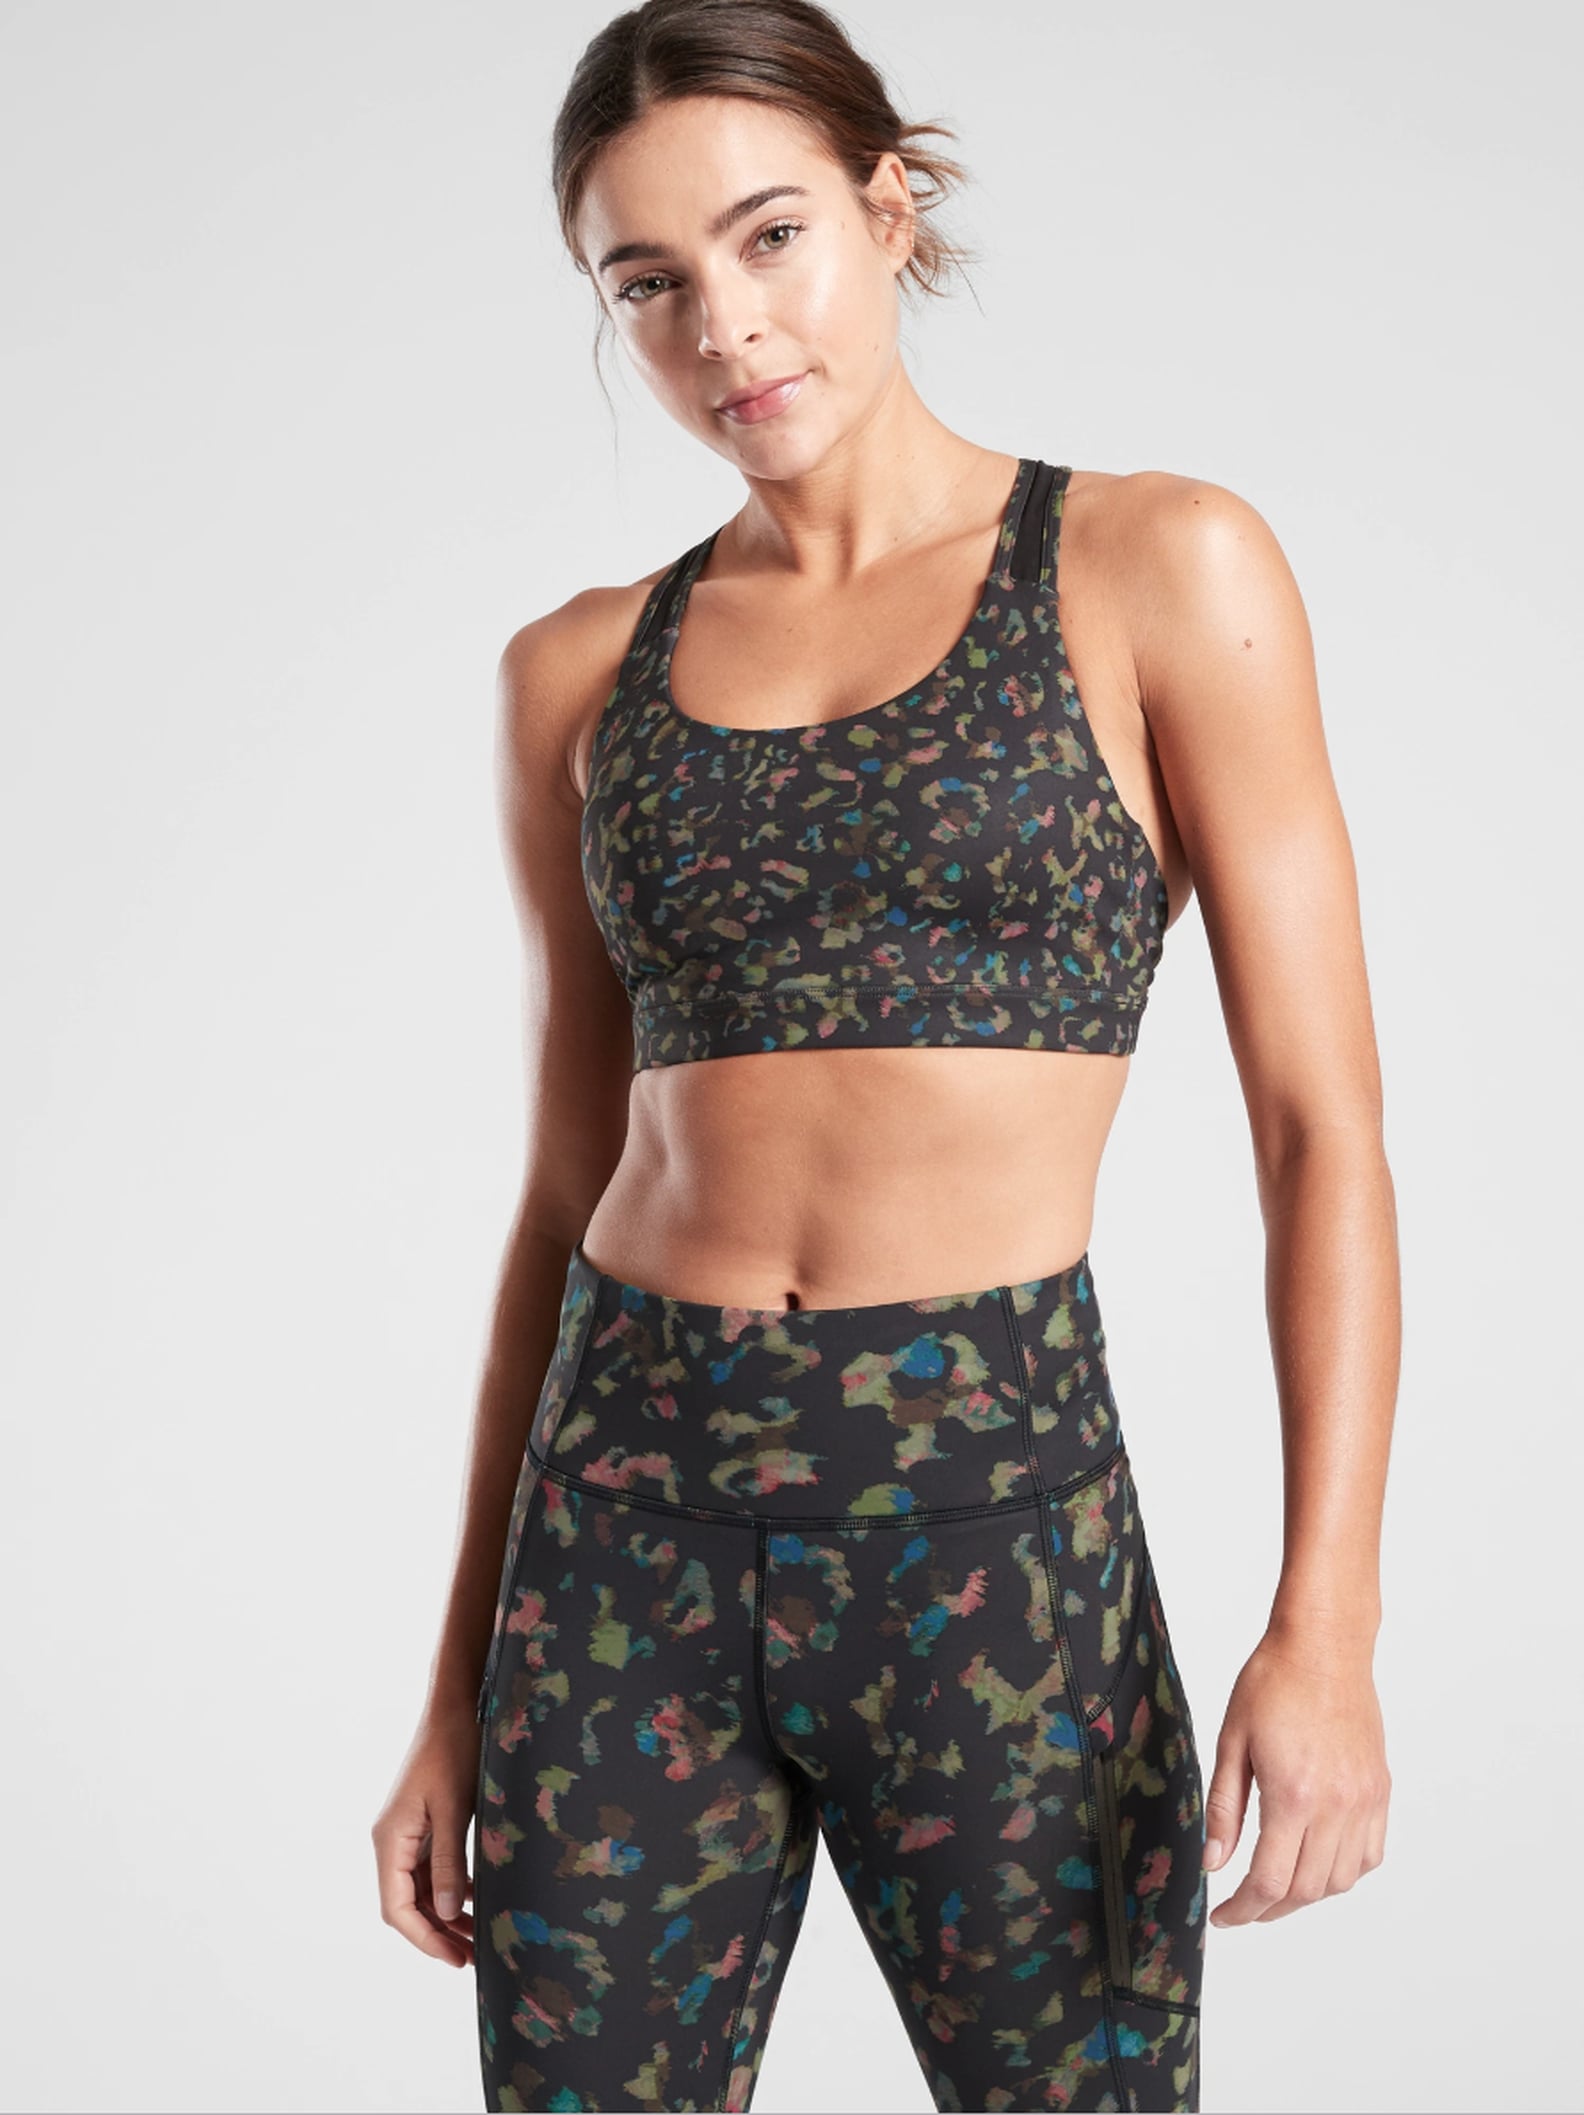 These Matching Workout Sets Are the Prettiest Fitness Gifts | POPSUGAR ...